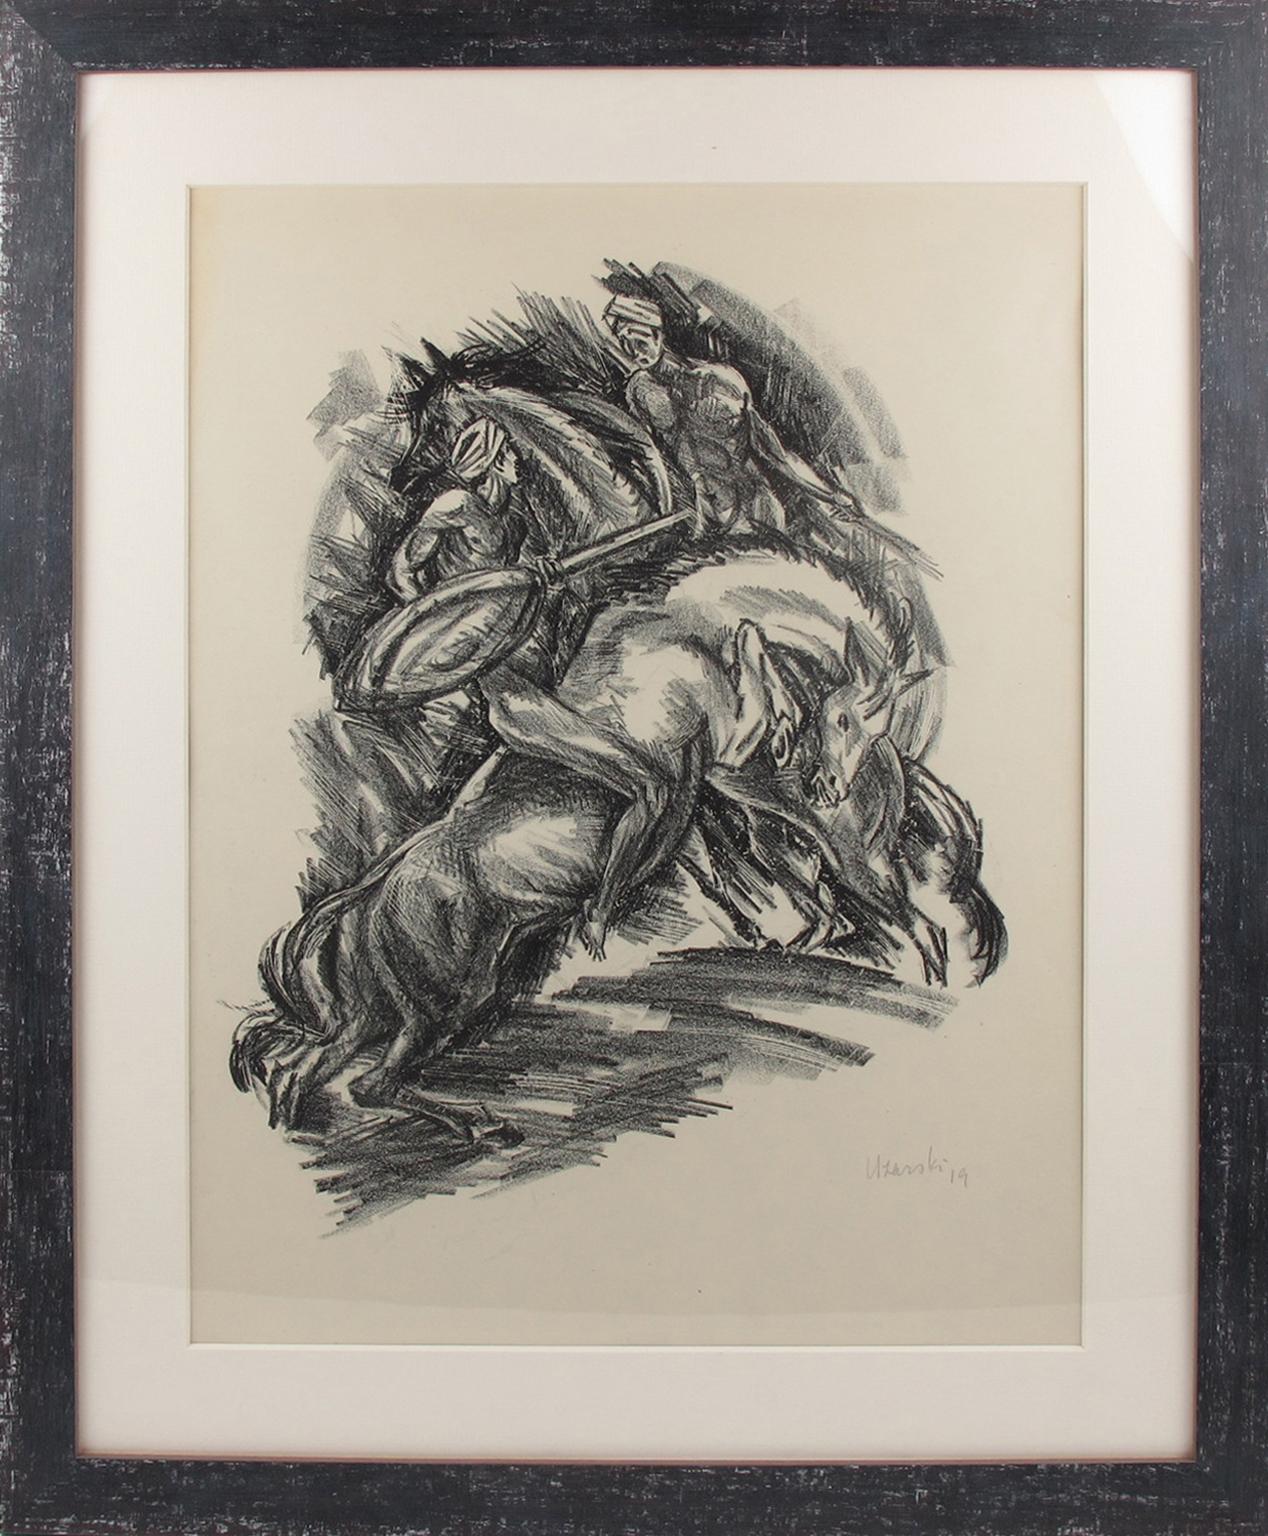 German Artist Adolf Uzarski (1885 - 1970) designed this stunning charcoal drawing lithograph print on paper, depicting two riders in a wild dance or fight. This drawing is part of a set of five lithographs made to illustrate scenes from the 14th